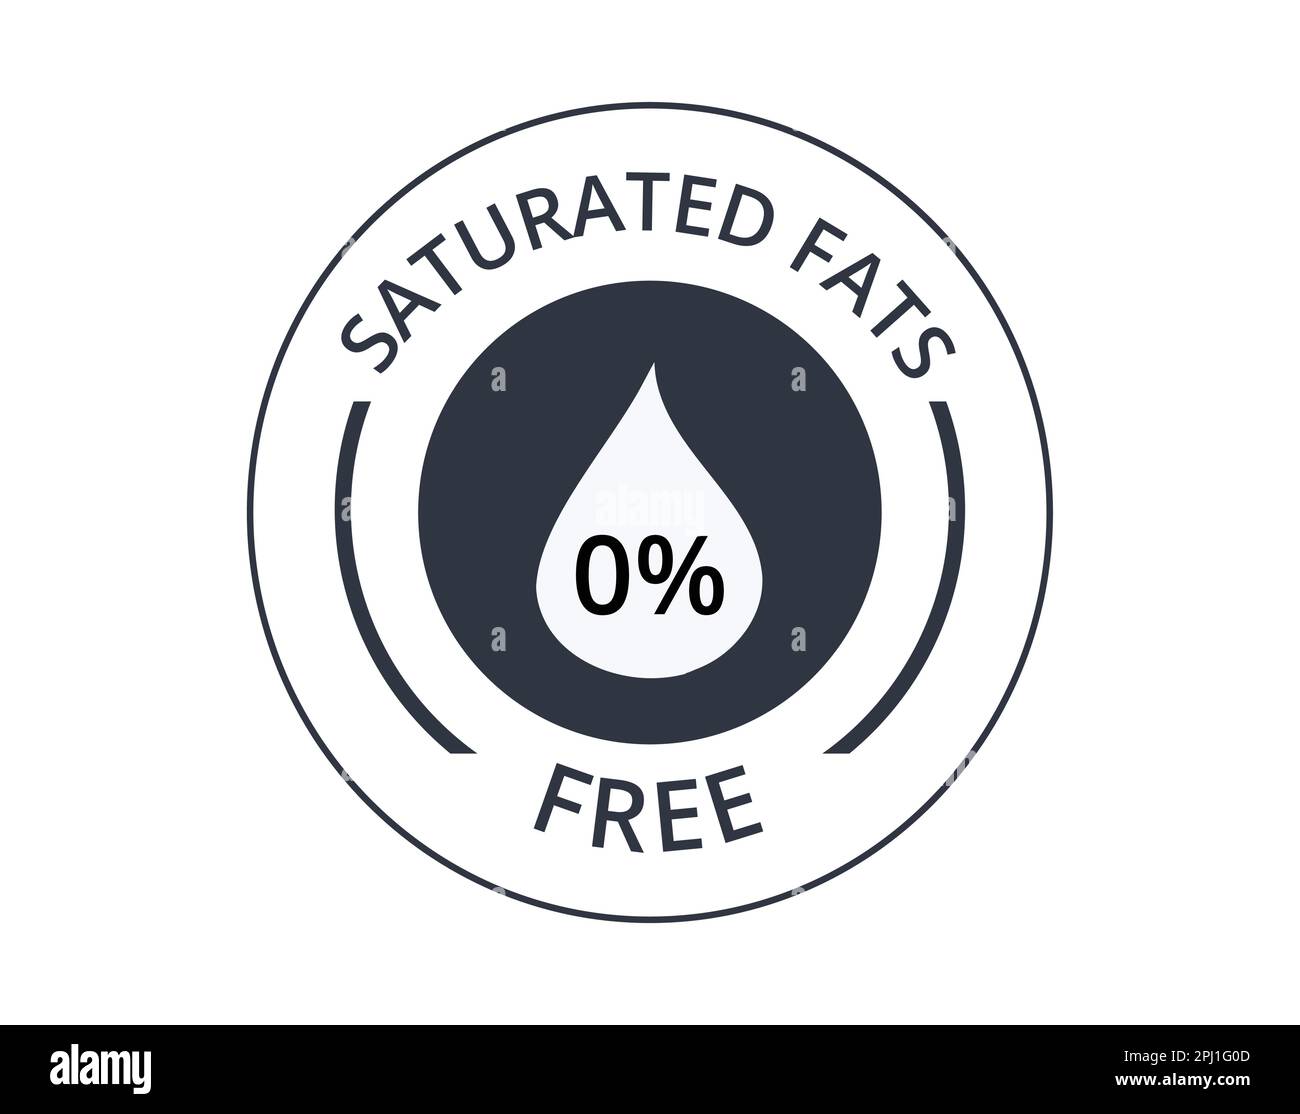 Saturated Fats Free Symbol for Food Products. Vector Illustration Stock Vector